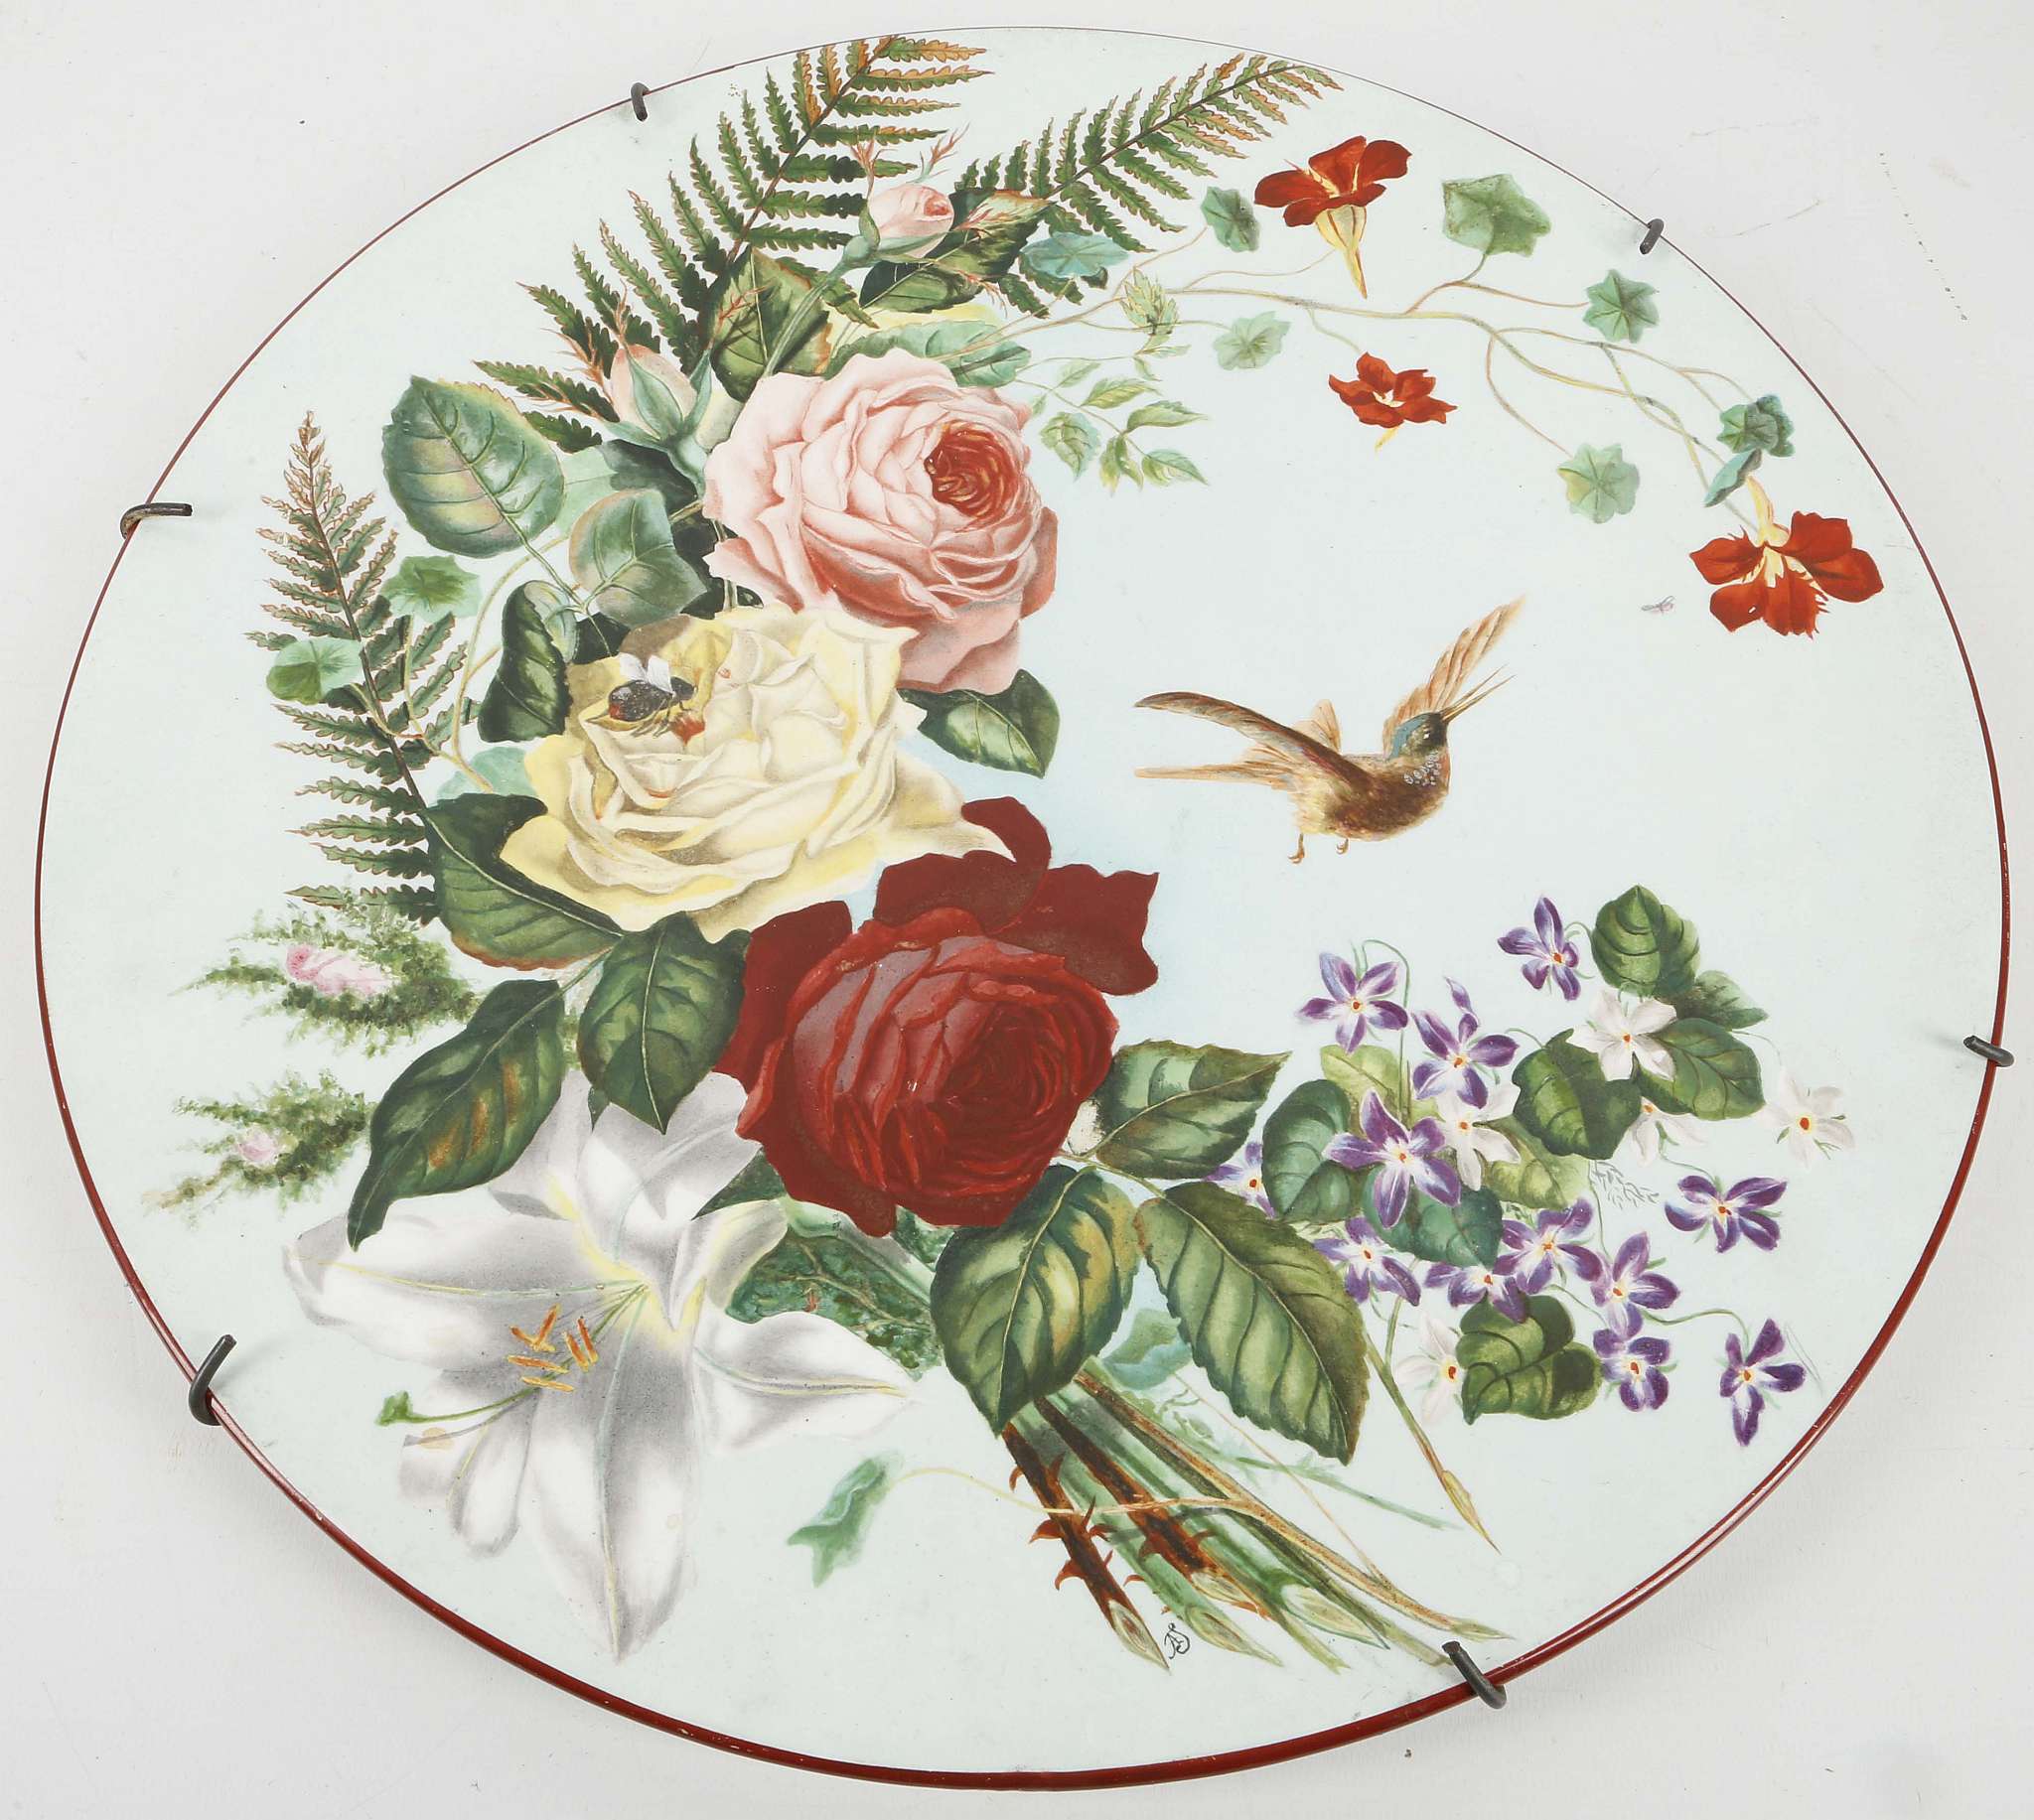 Boch Freres charger, late 19th Century humming bird and floral study, 40cm diameter